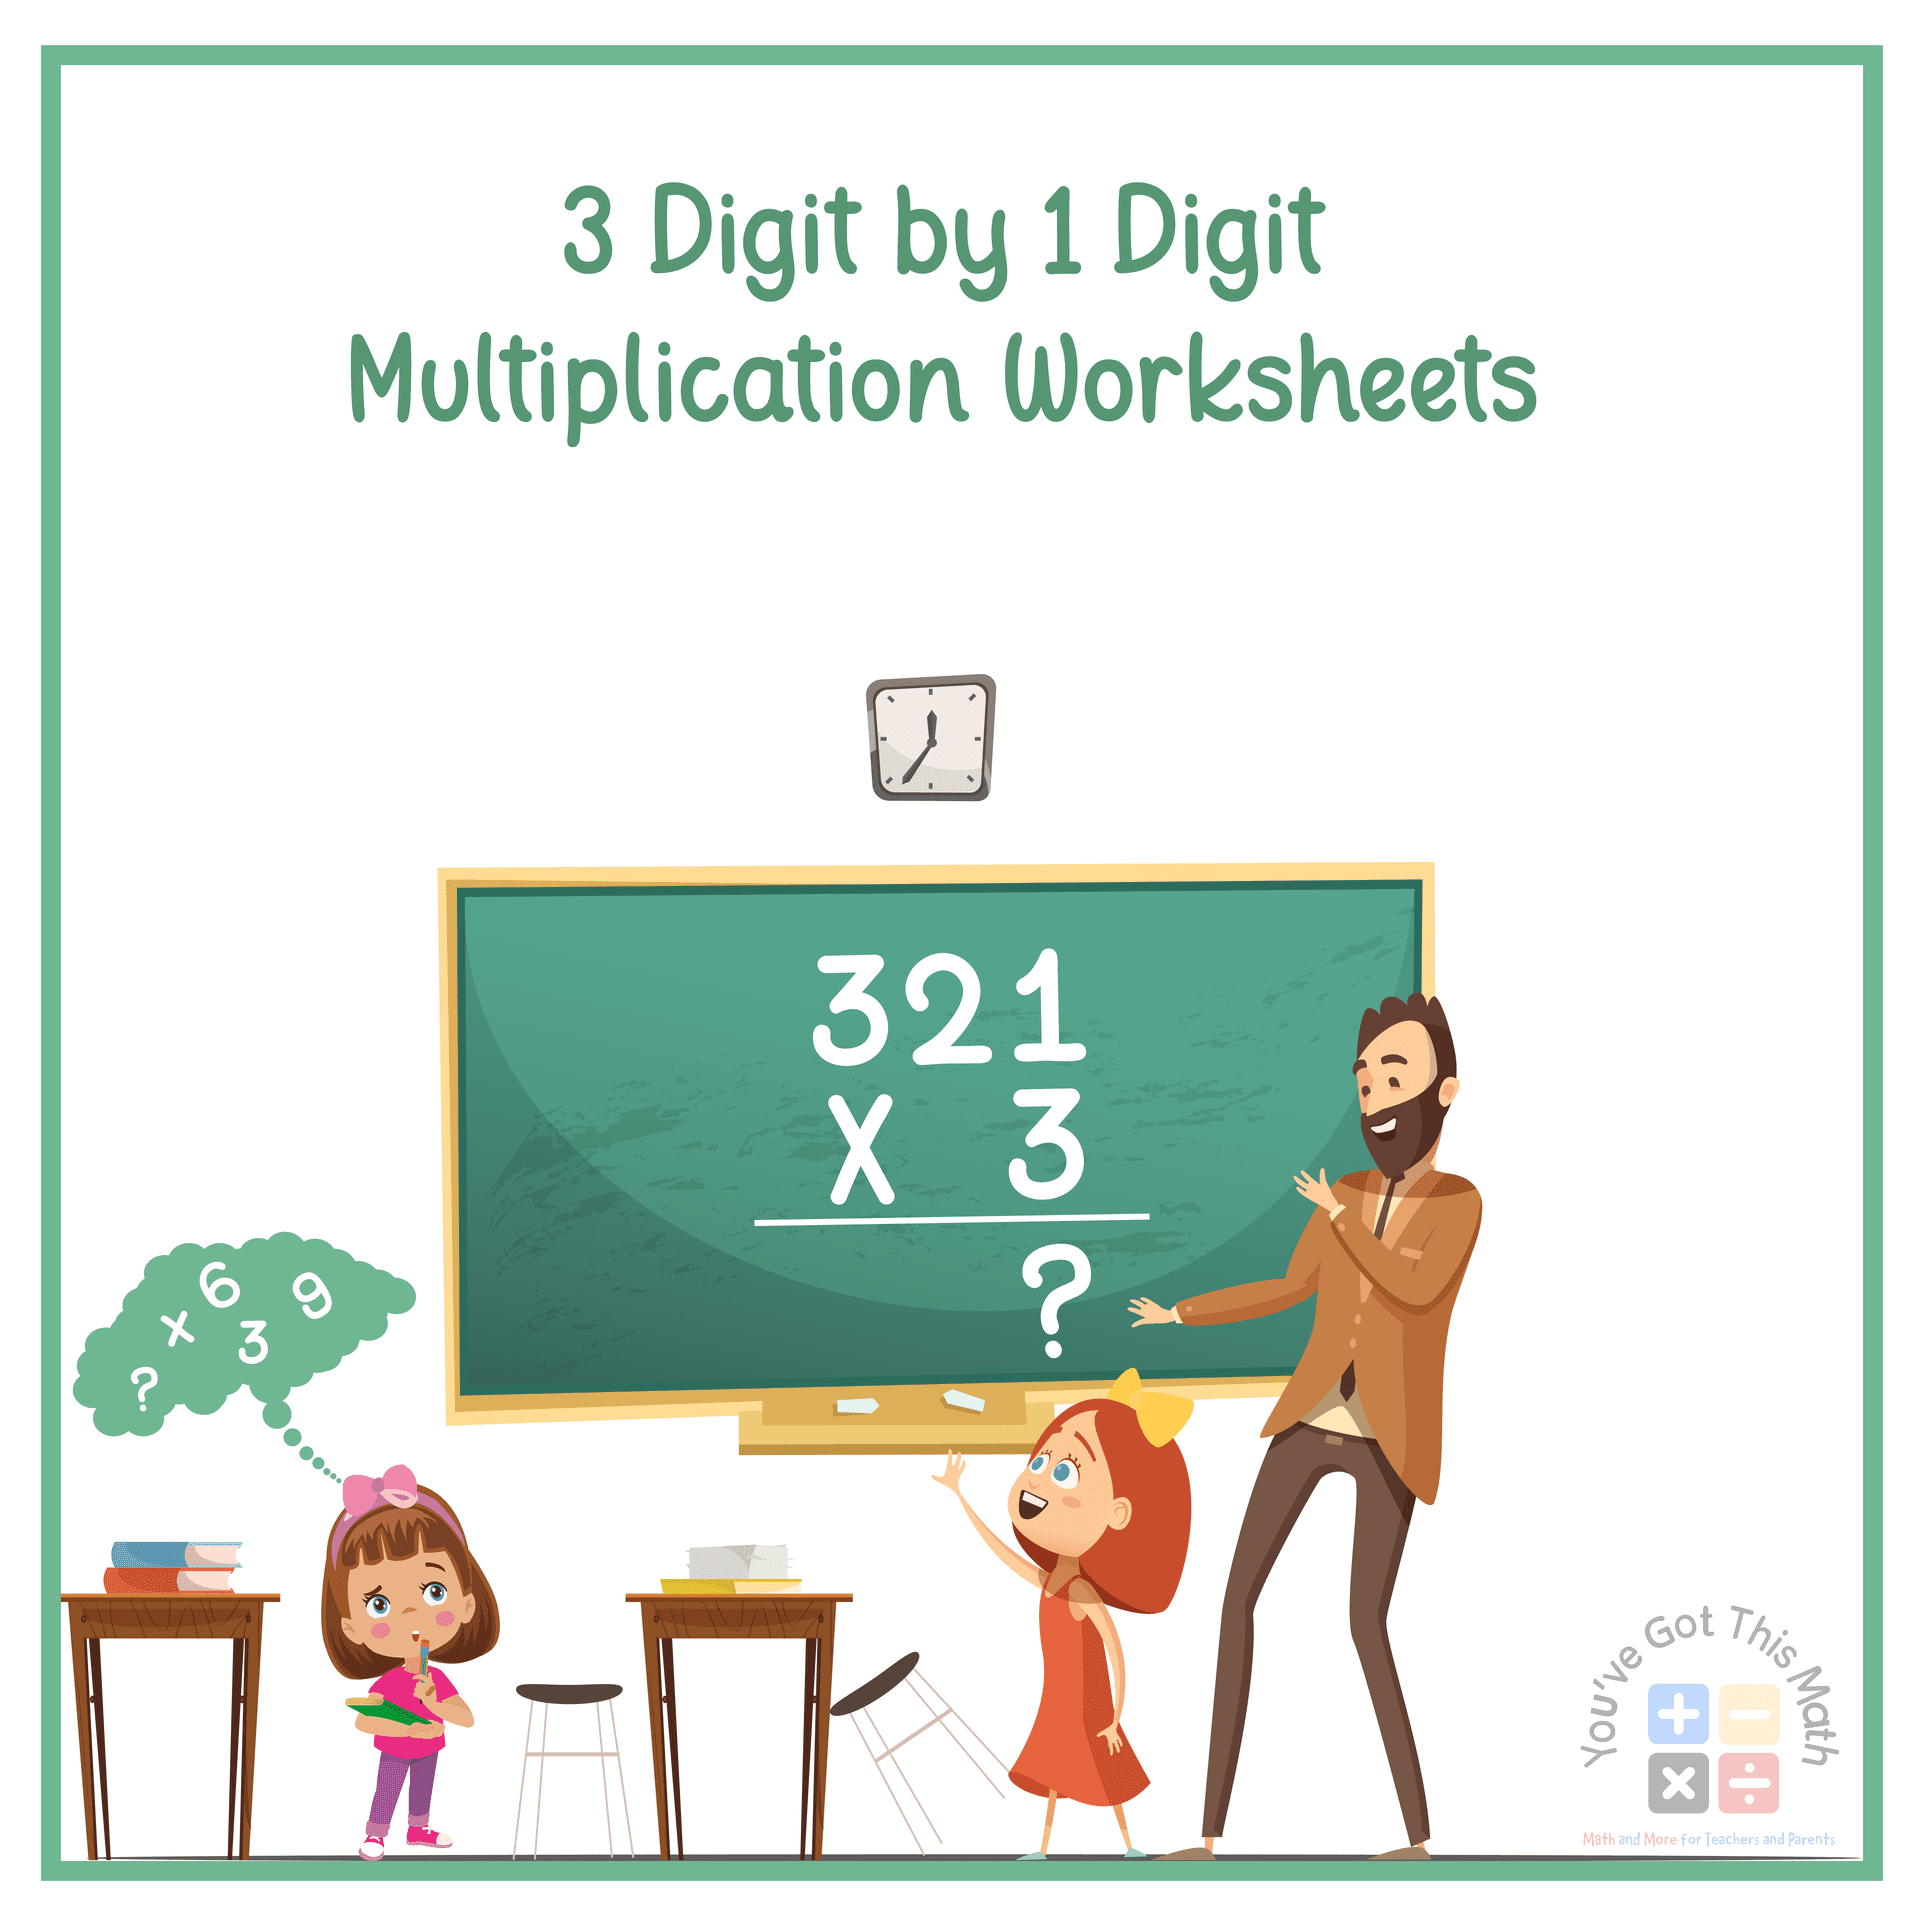 Doing multiplication to learn Free 3 Digit by 1 Digit Multiplication Worksheets